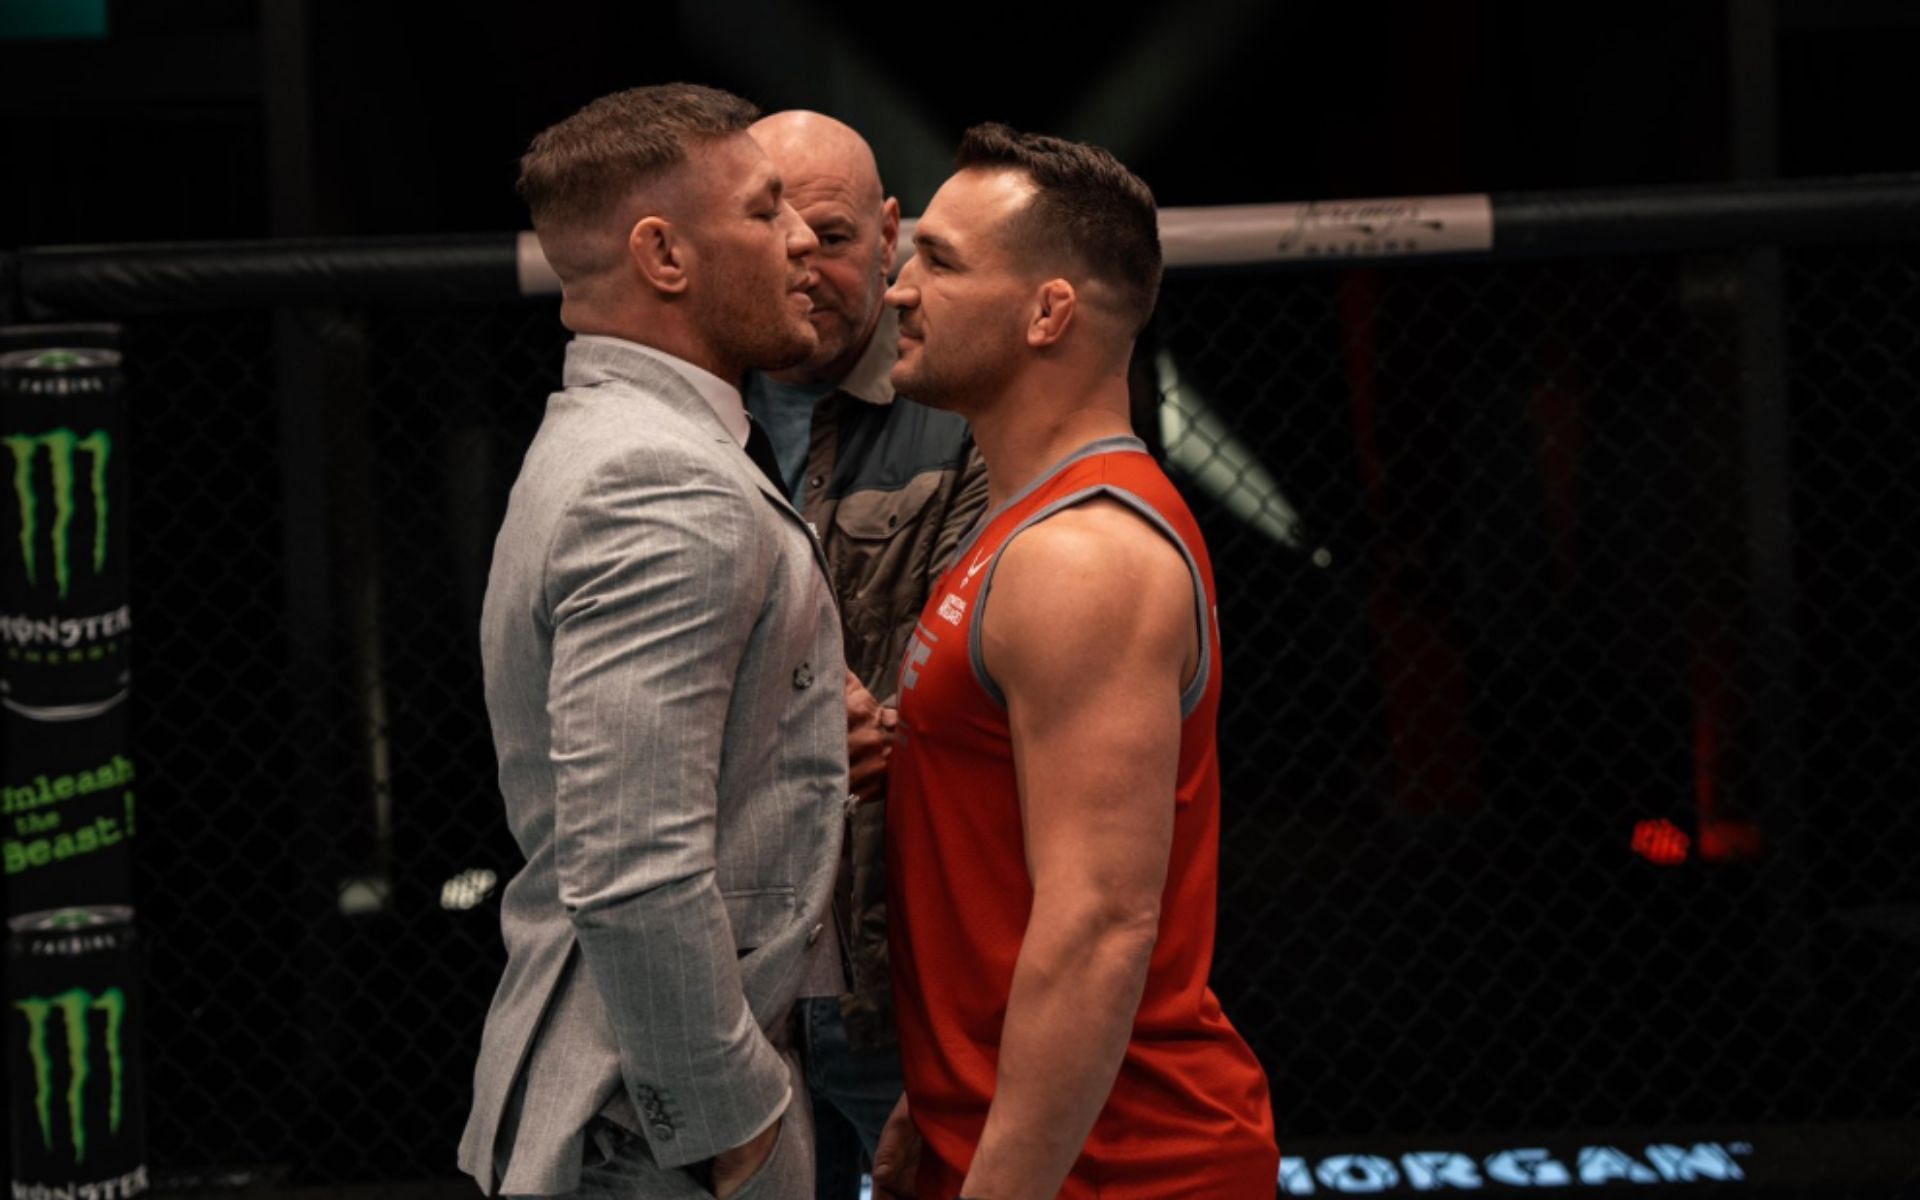 Conor McGregor (left) and Michael Chandler (right) facing off at The Ultimate FIghter season 31 [Photo Courtesy @thenotoriousmma on X]